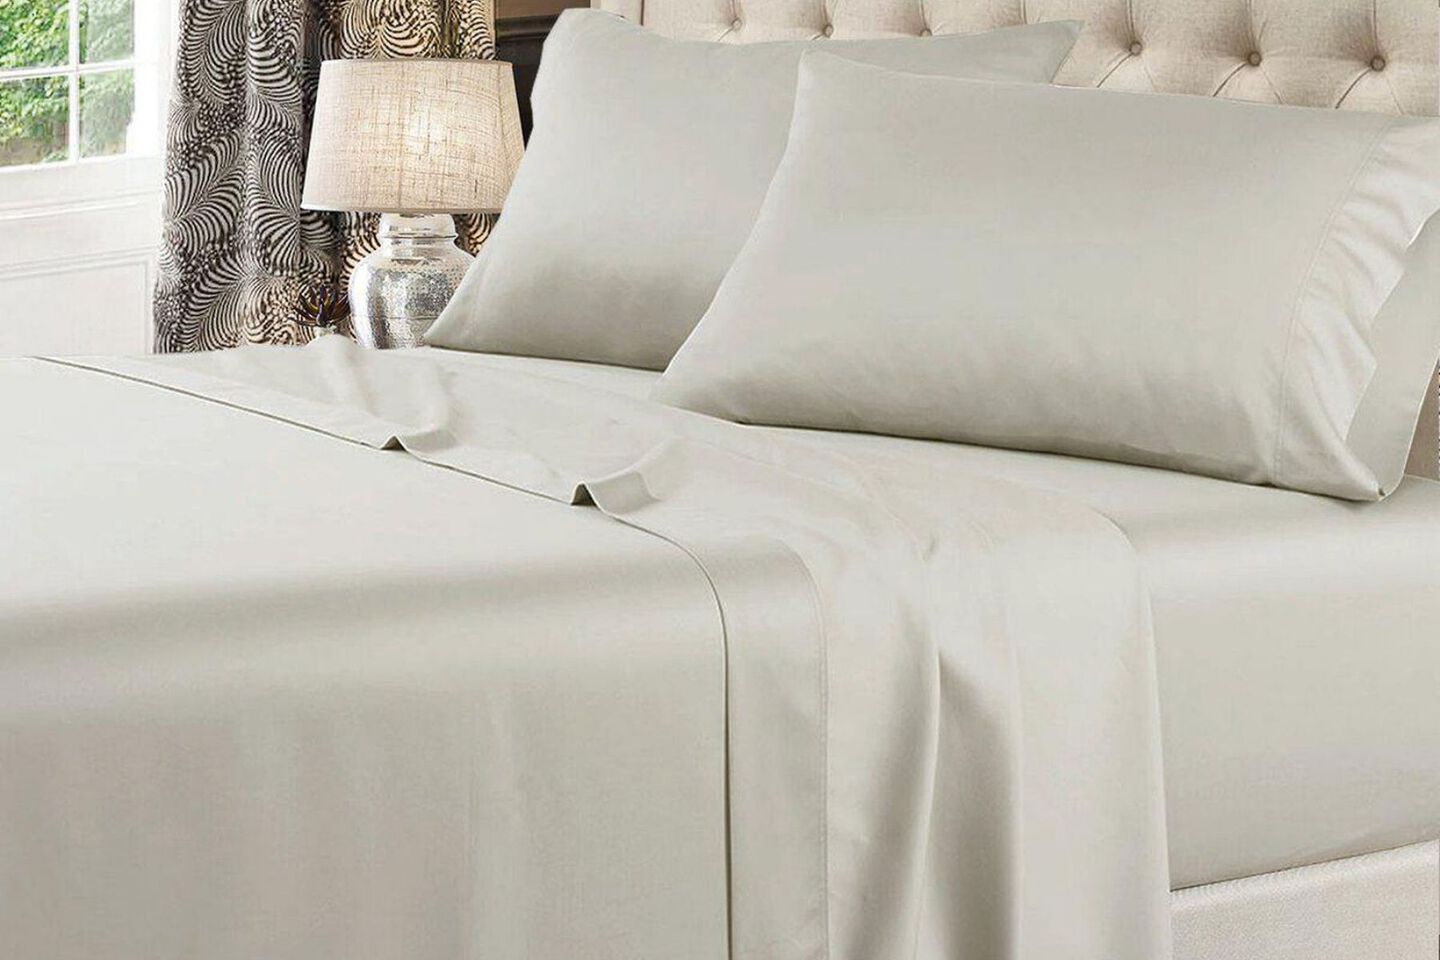 Tightly made bed with light grey sheets and pillows